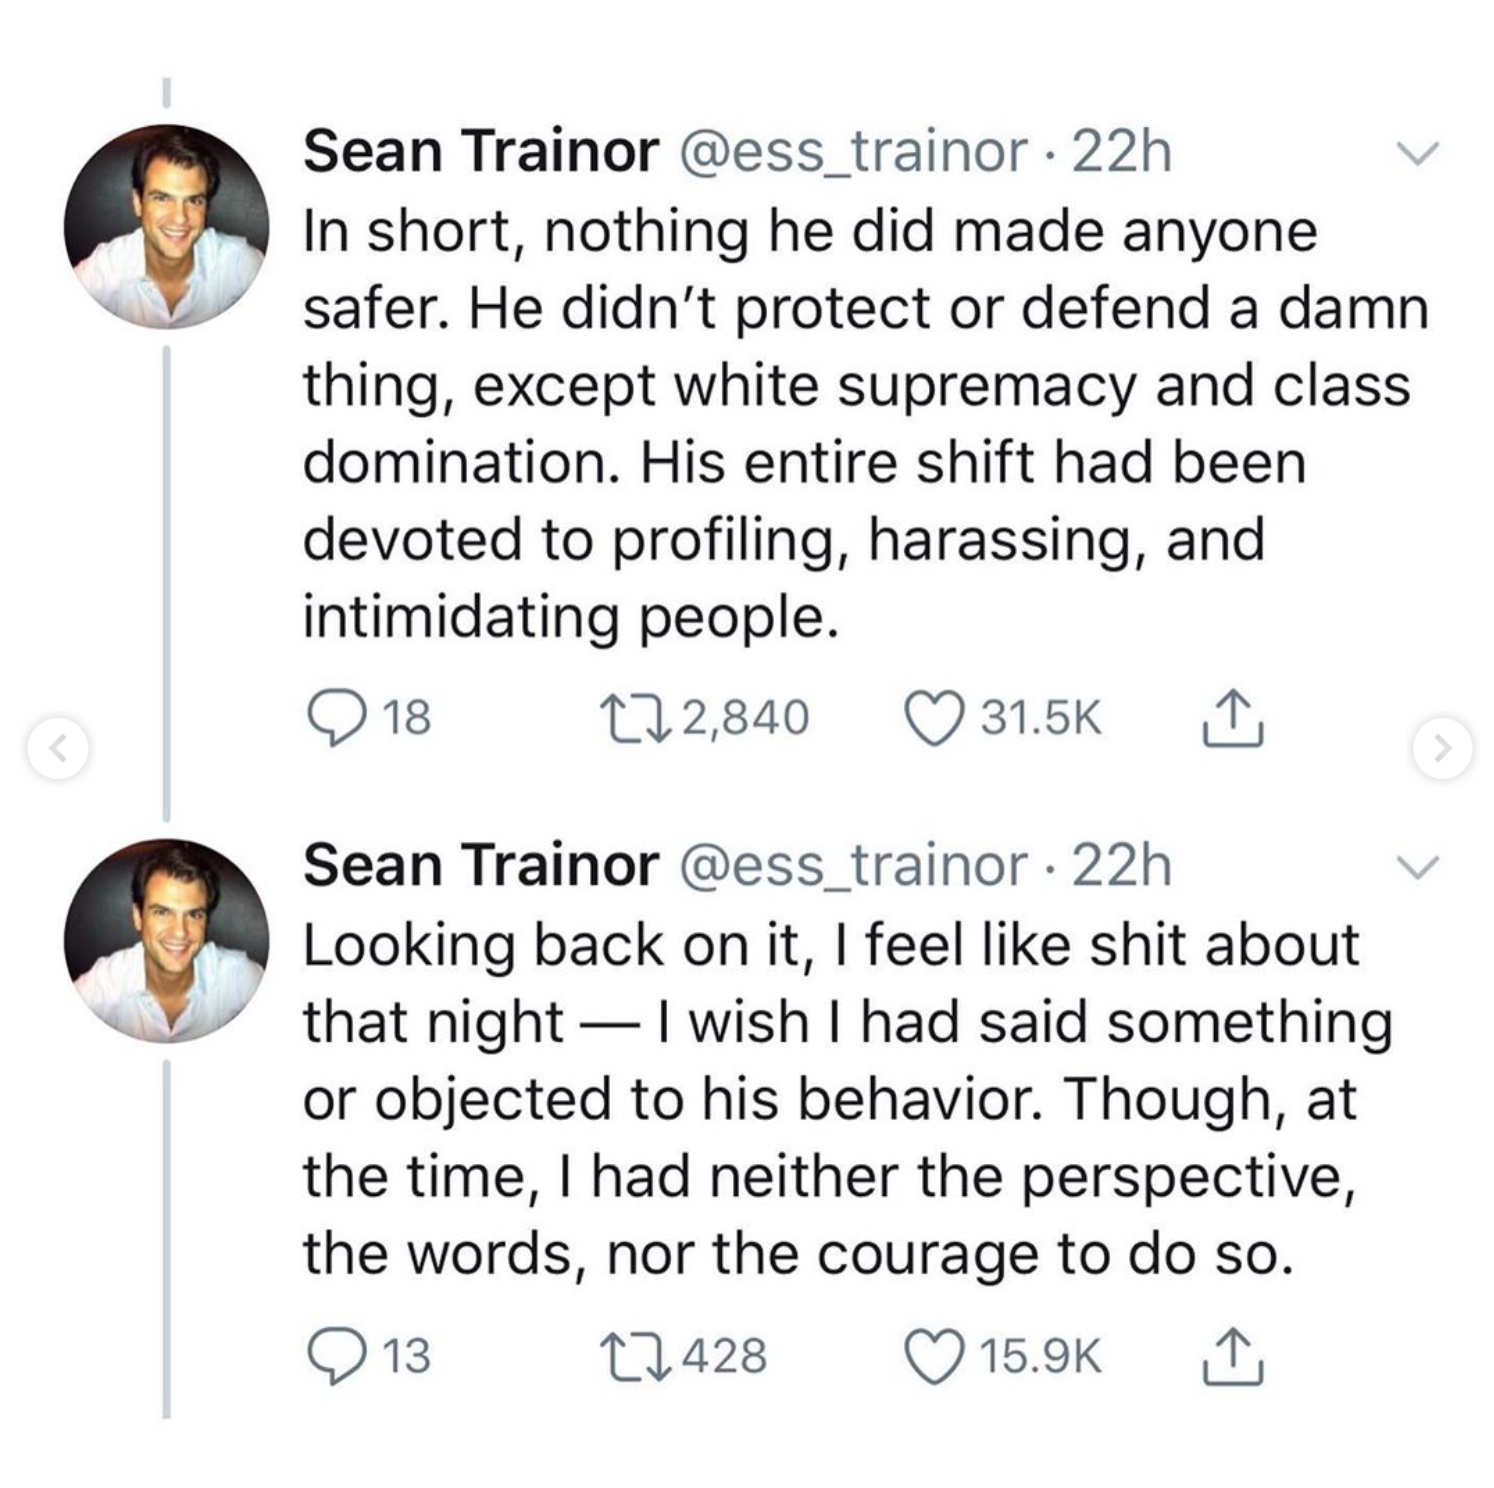 point - Sean Trainor . 22h In short, nothing he did made anyone safer. He didn't protect or defend a damn thing, except white supremacy and class domination. His entire shift had been devoted to profiling, harassing, and intimidating people. 122,840 1 18 